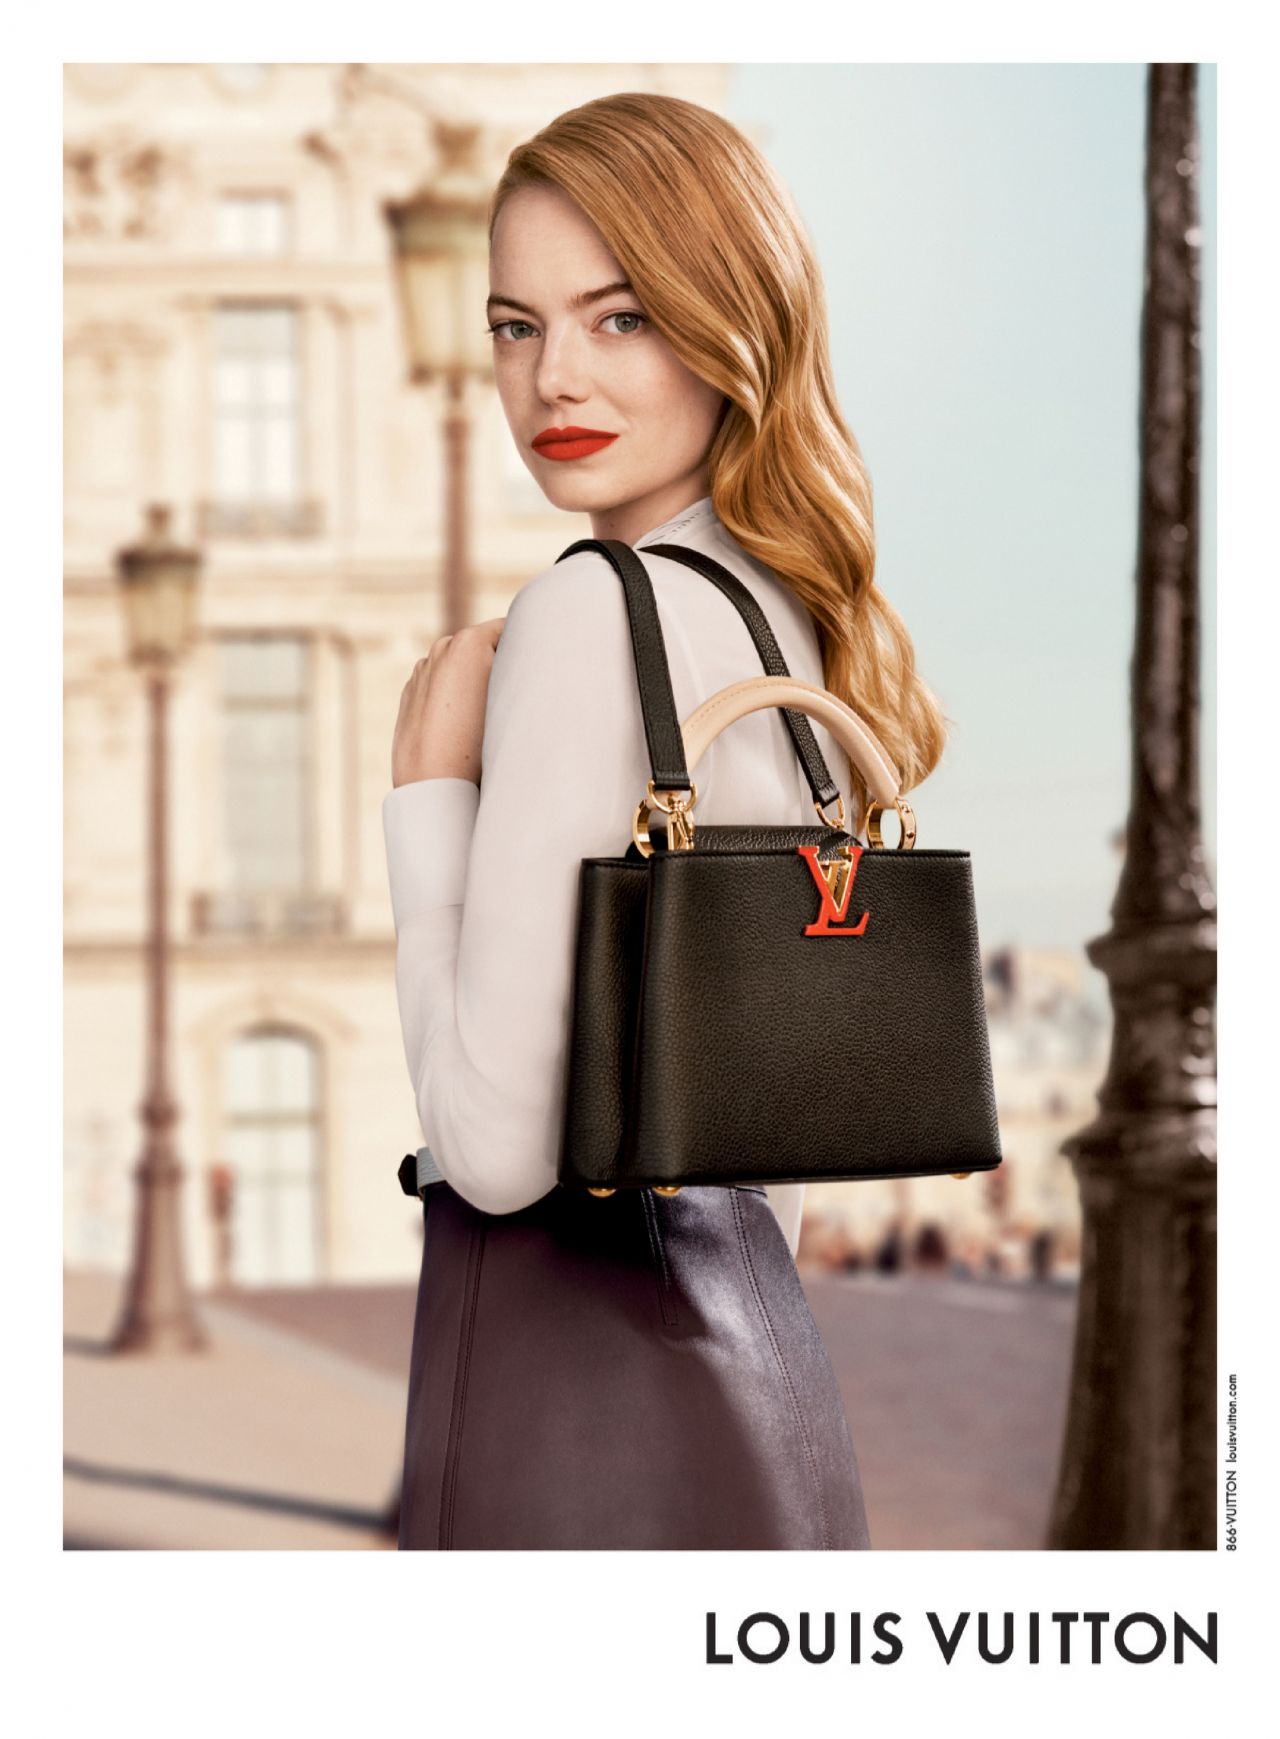 LOUIS VUITTON THE BOOK #9 and #10 Emma Stone Catalog Not for Sale